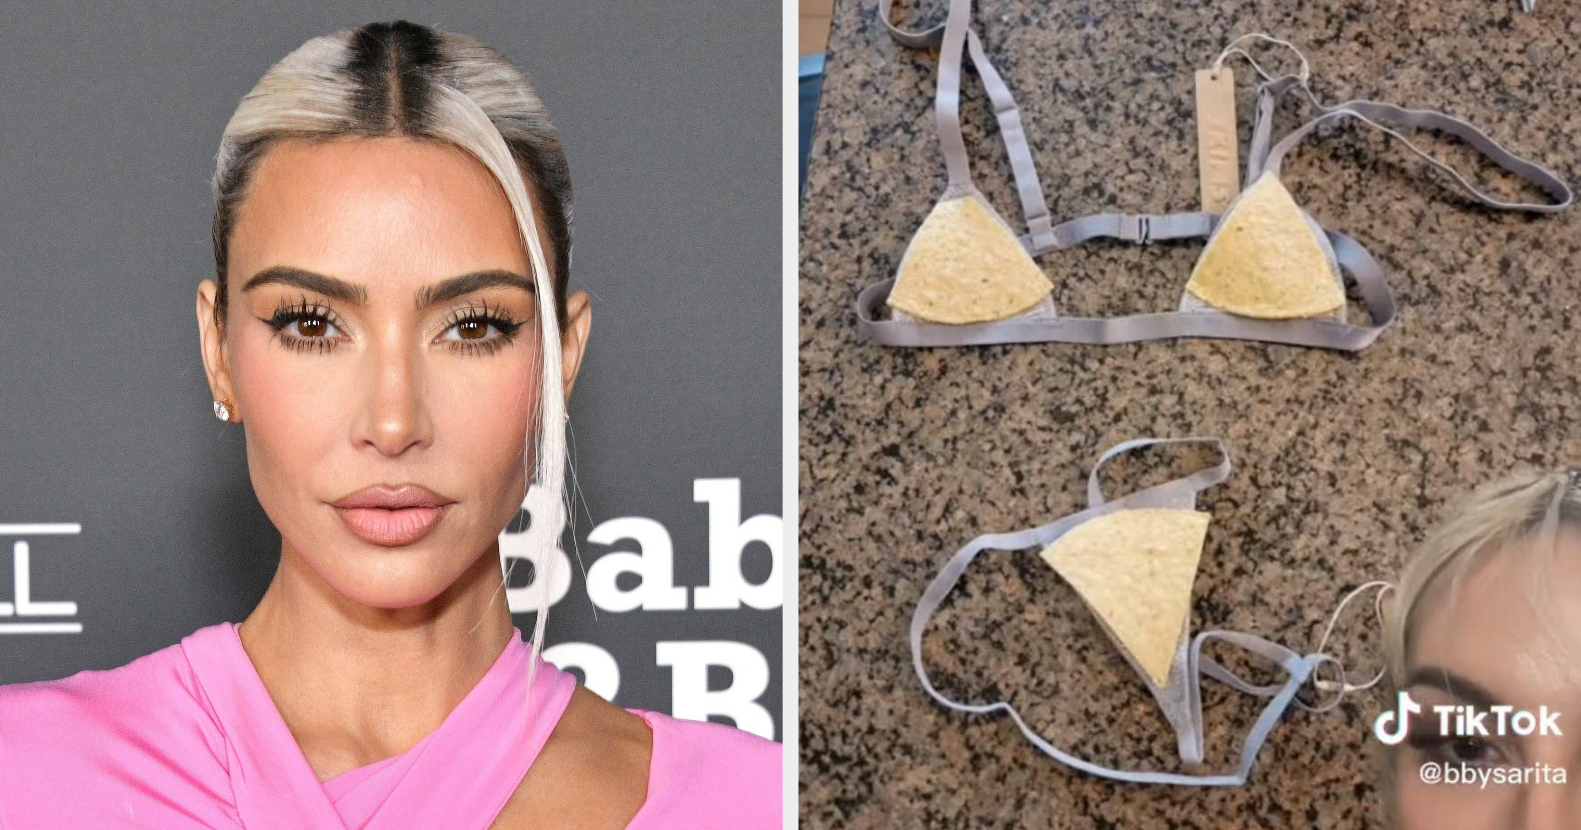 Kim Kardashian ripped for tiny Skims thong that 'won't fit 95% of women' &  fans demand she sell clothes for 'all bodies